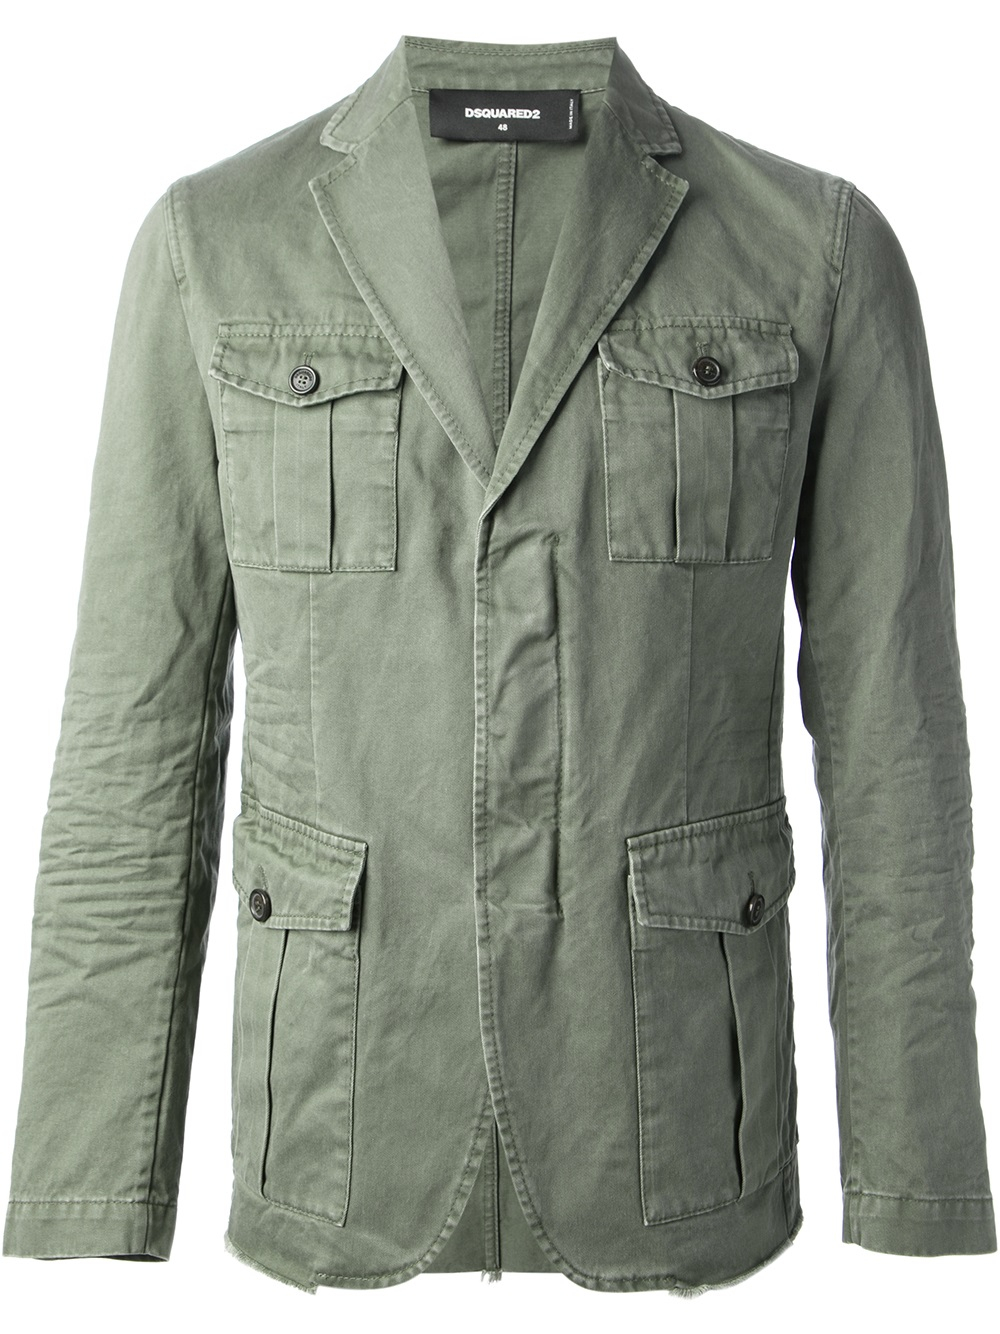 DSquared² Military Style Jacket in Green for Men - Lyst